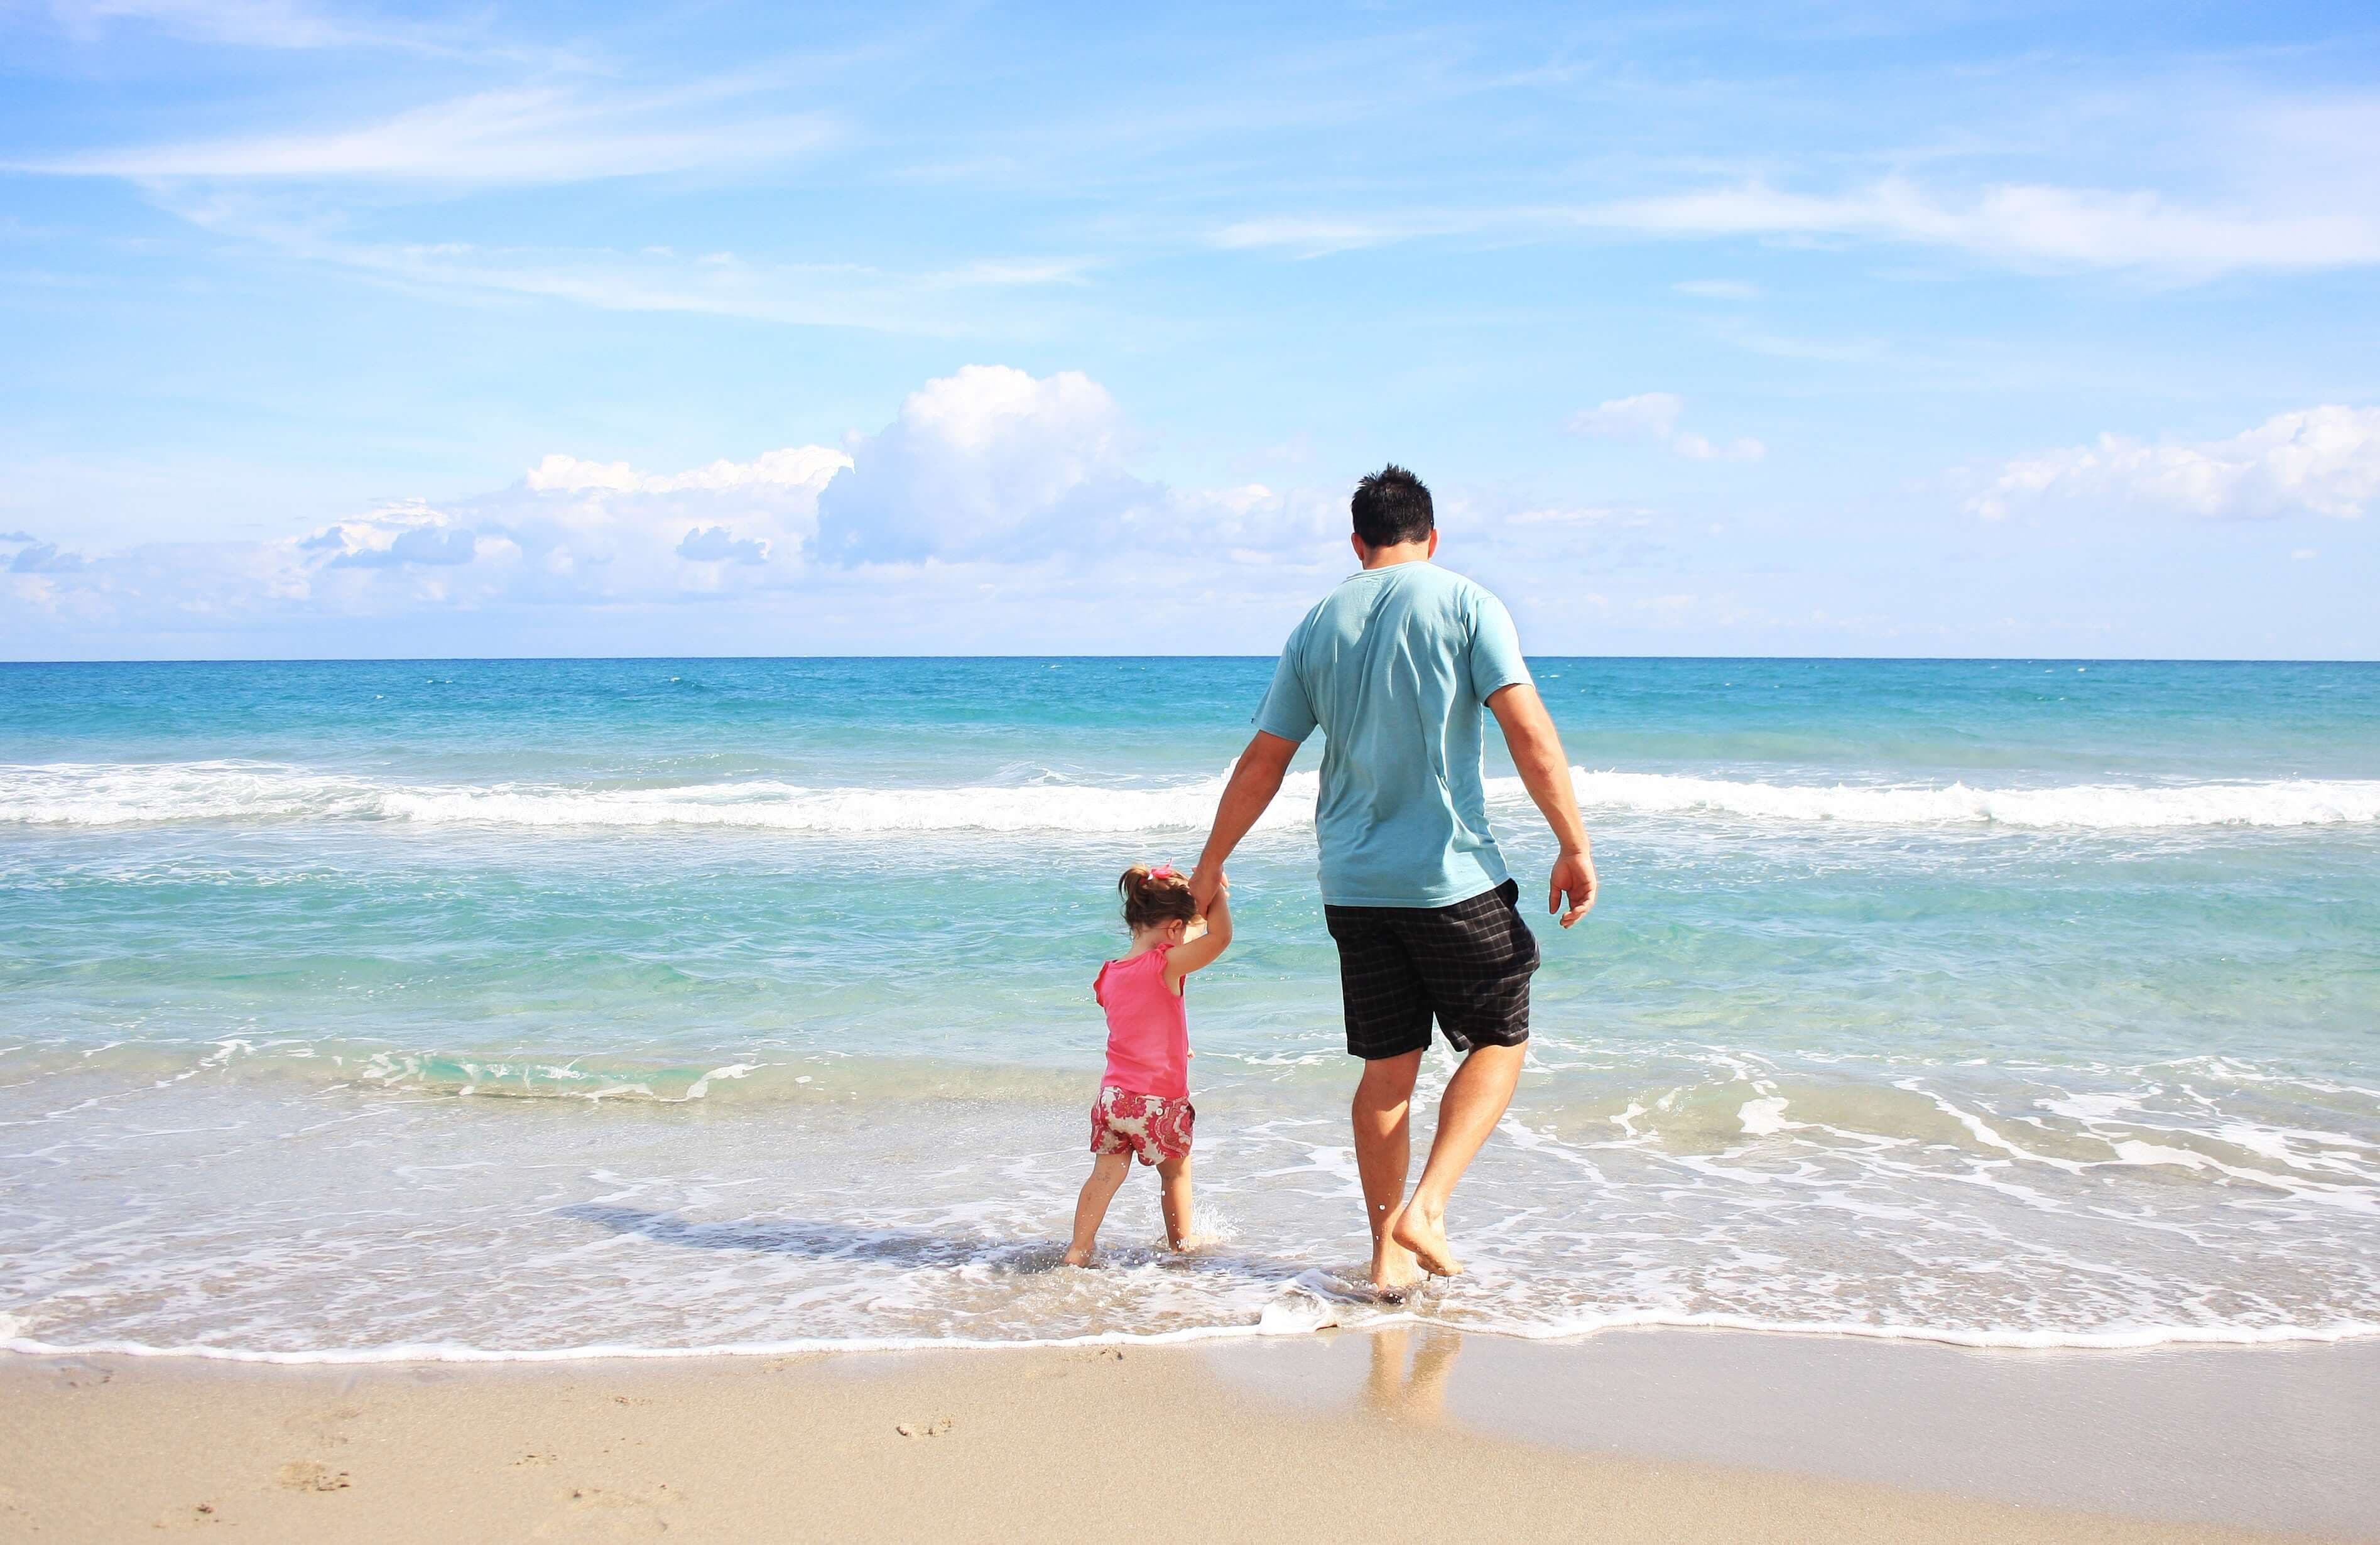 A father and young daughter walk along a beach